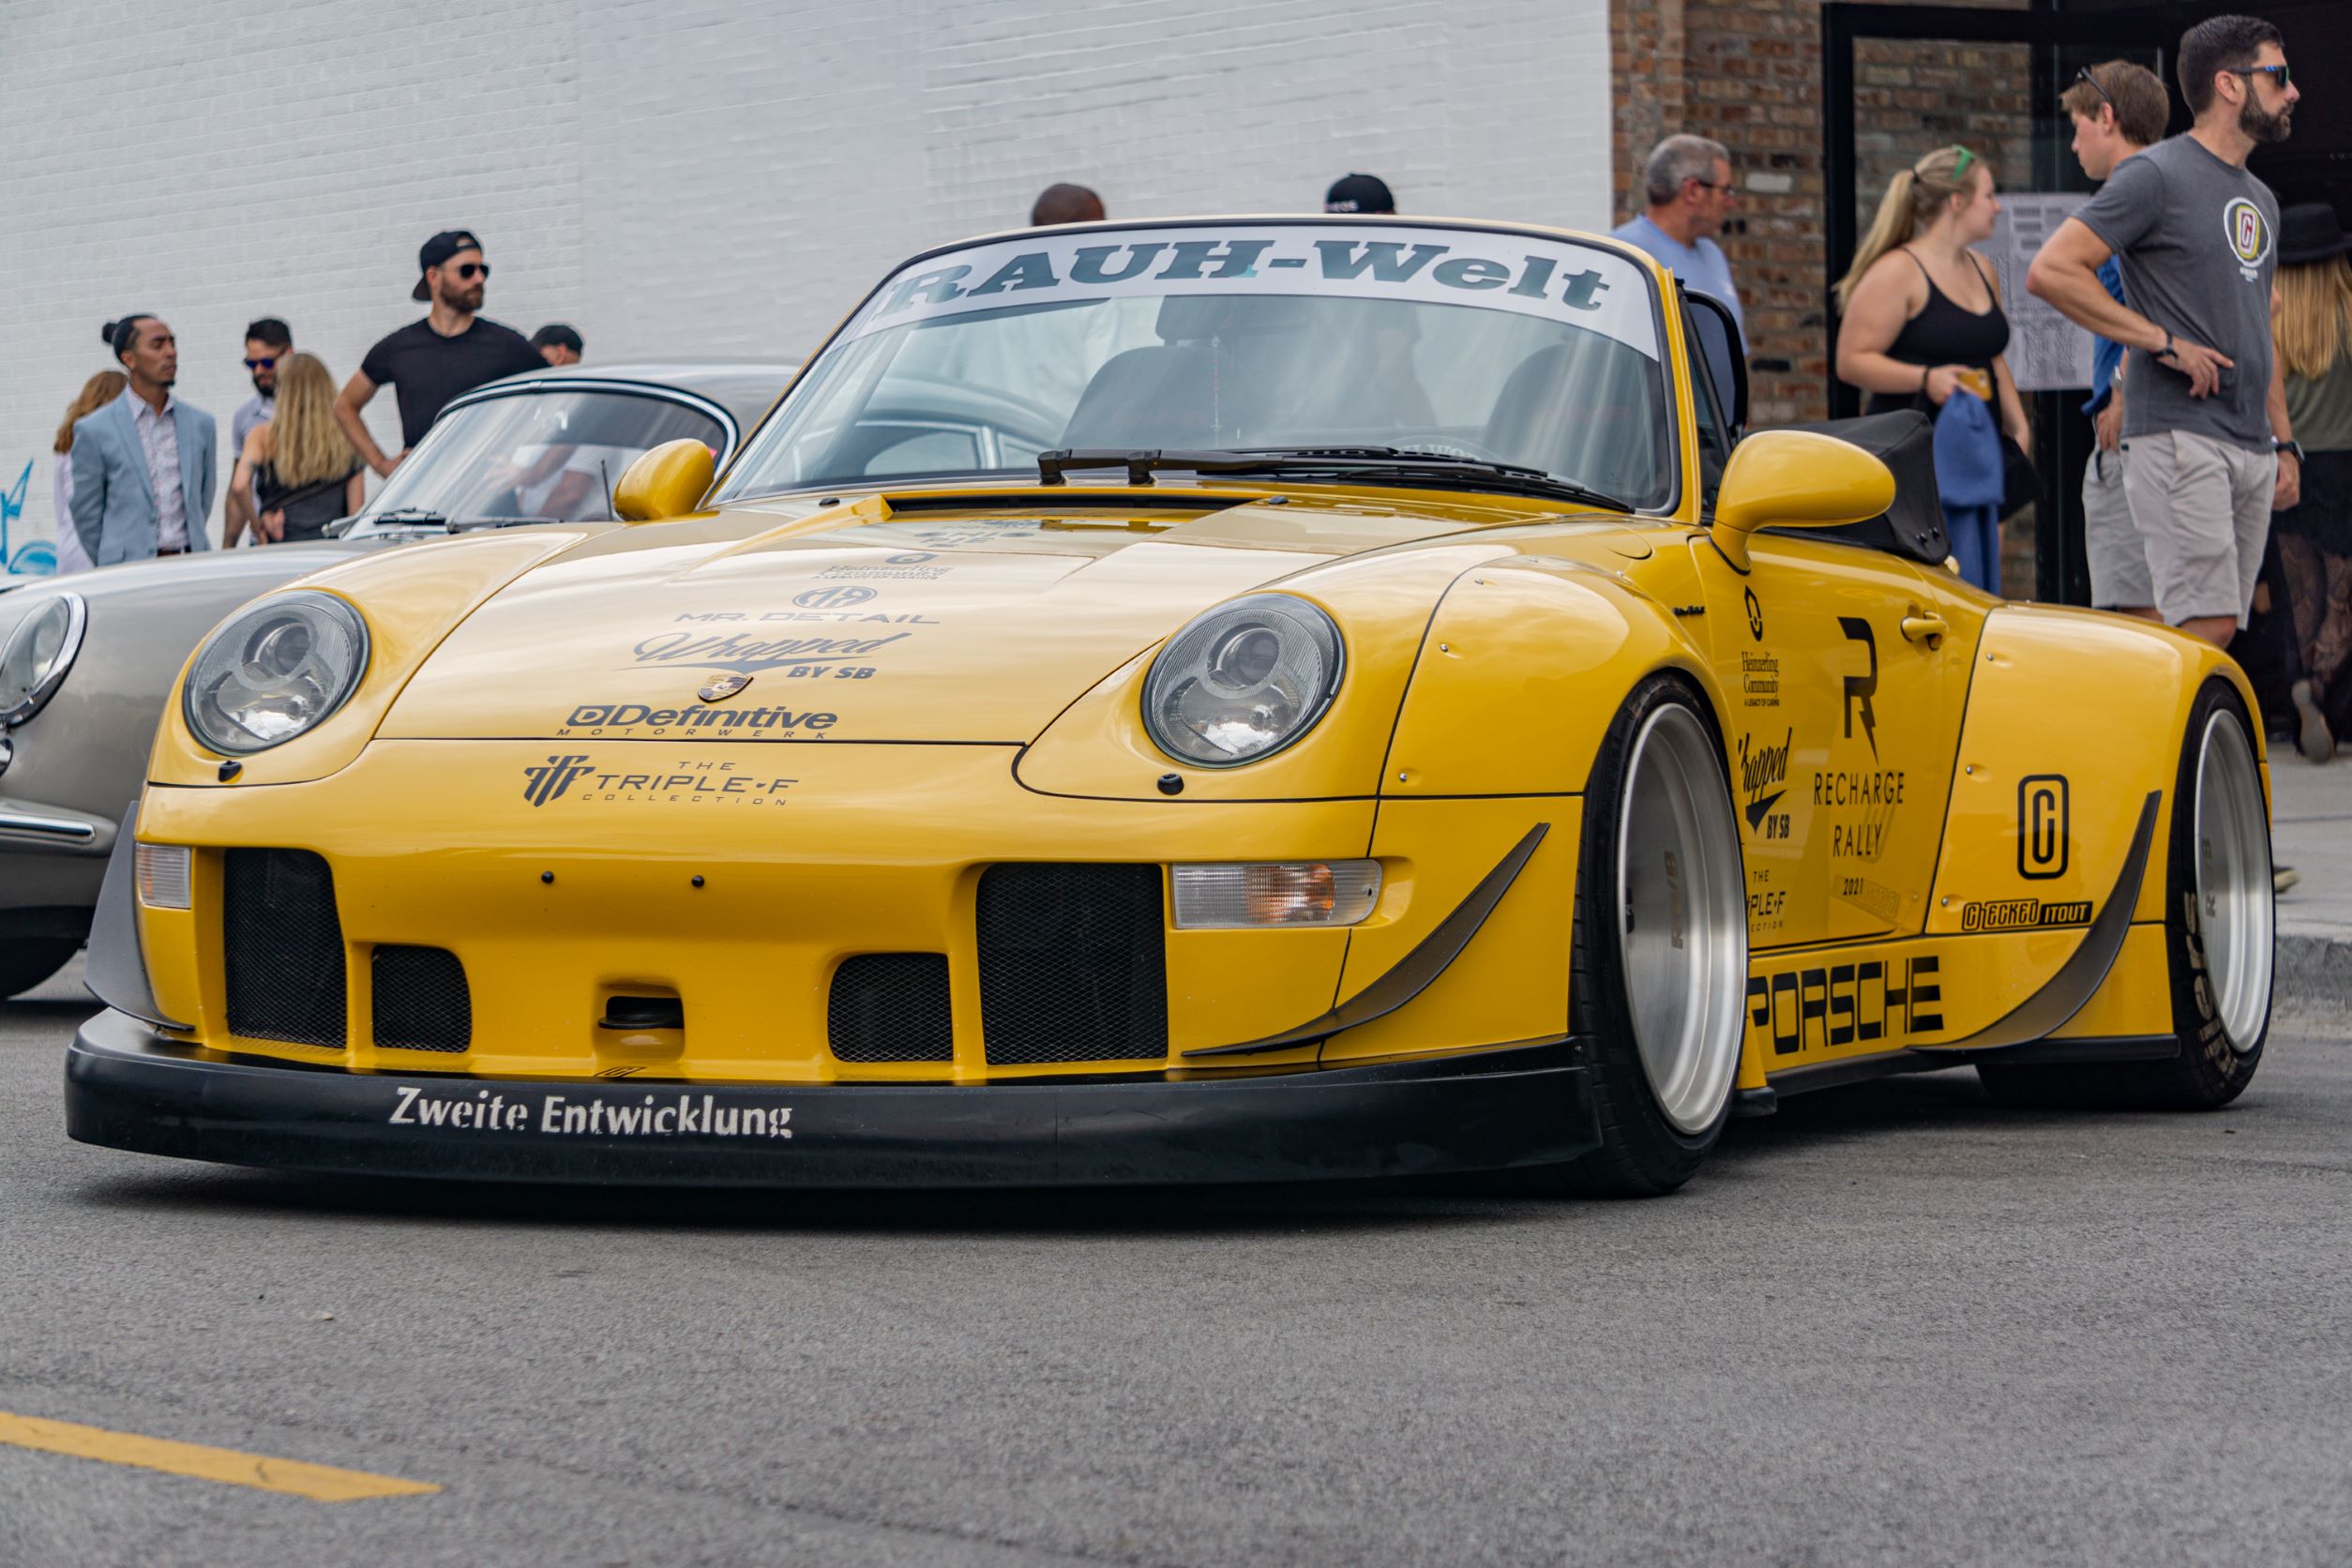 The front 3/4 view of the yellow-and-black RWB Porsche 993 911 Cabriolet 'Nohra'